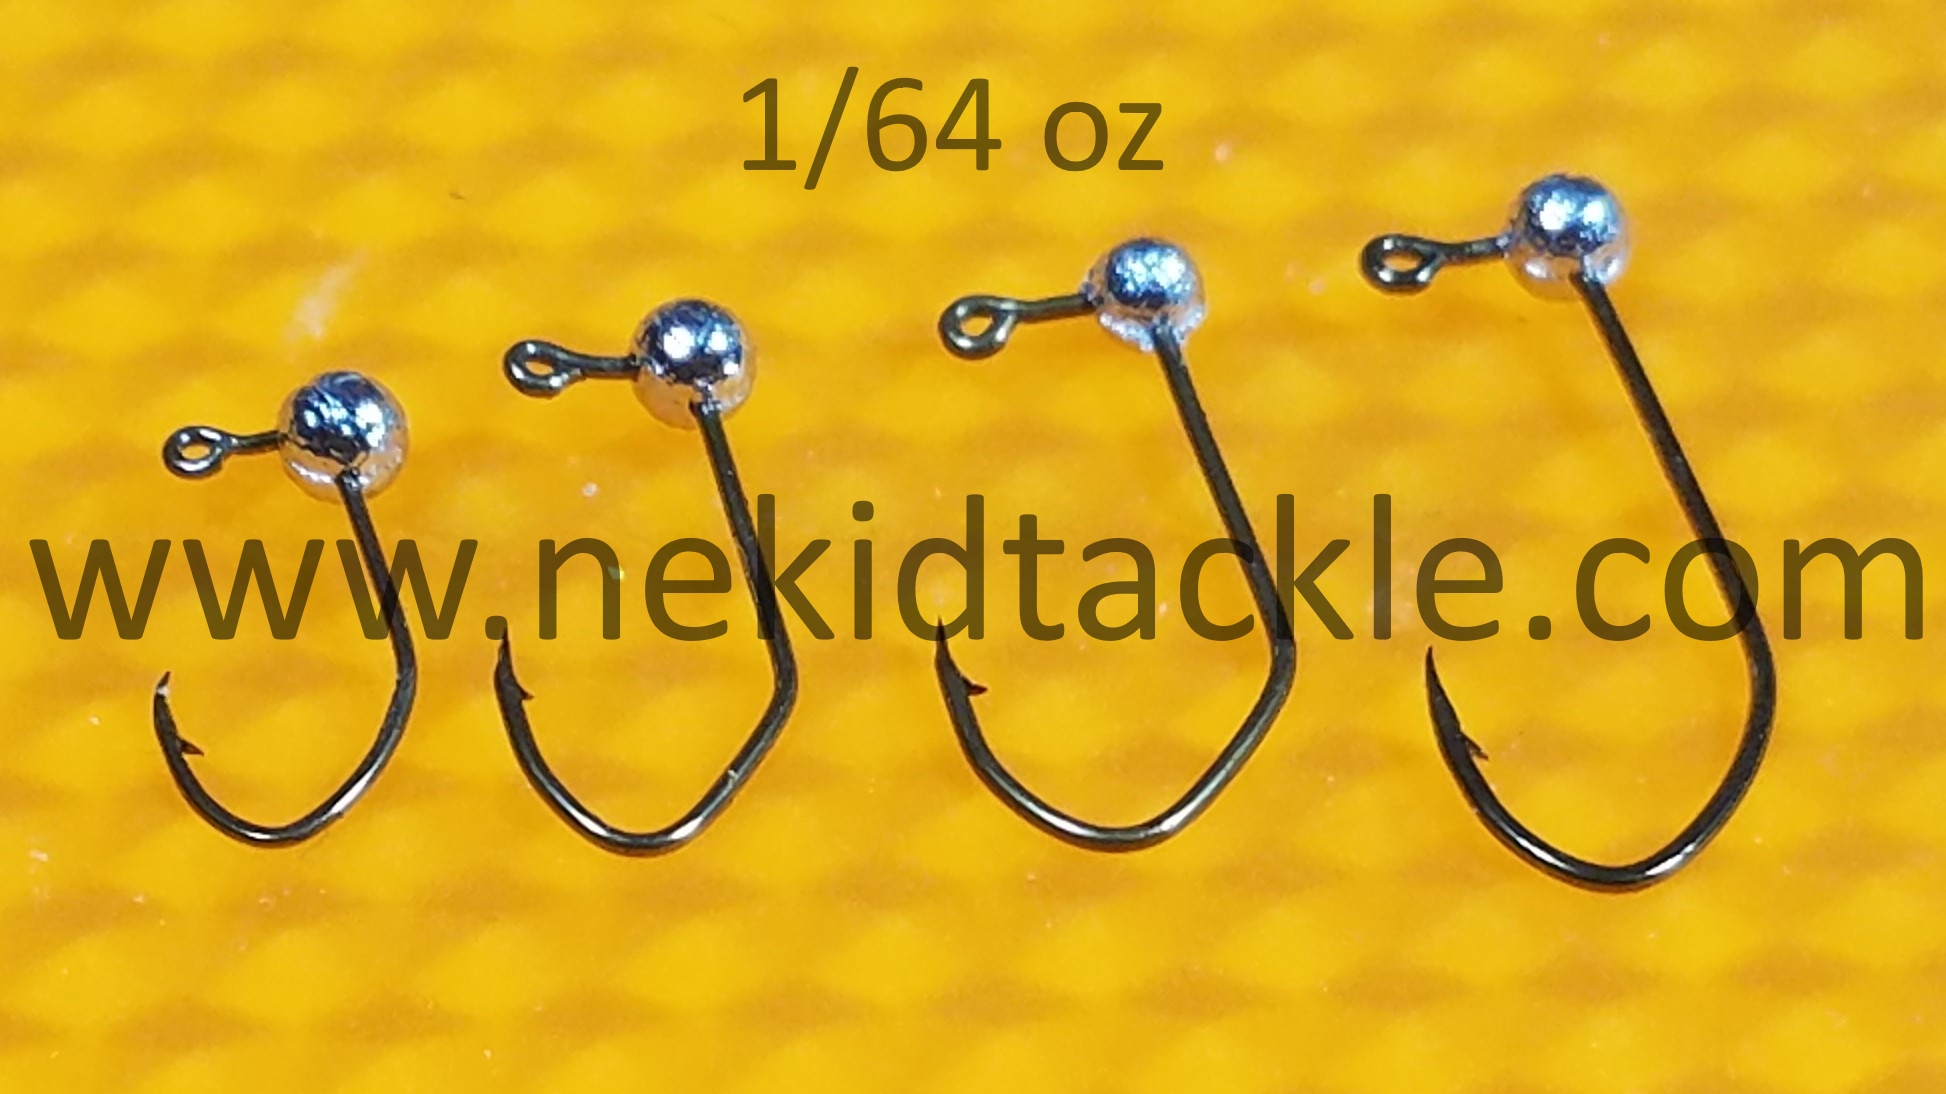 1 64th oz jig heads for Sale OFF 76%